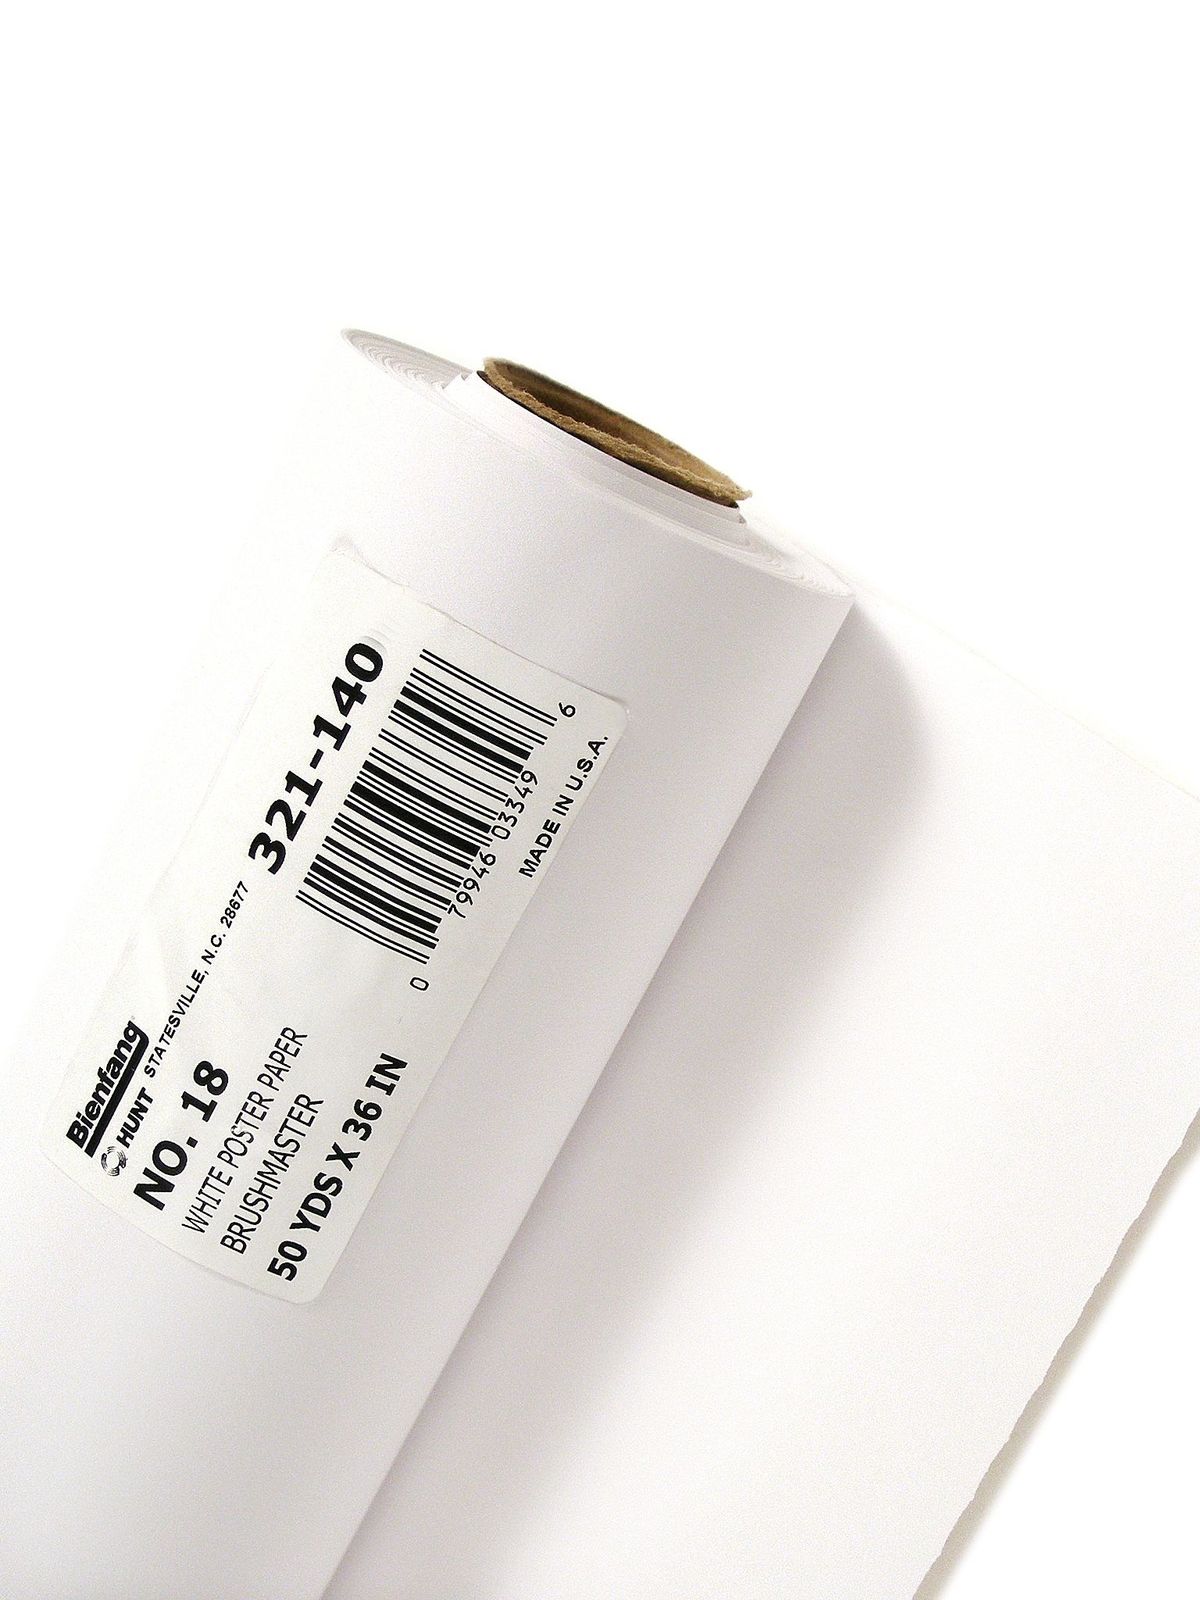 Bienfang No. 18 White Poster Paper Roll